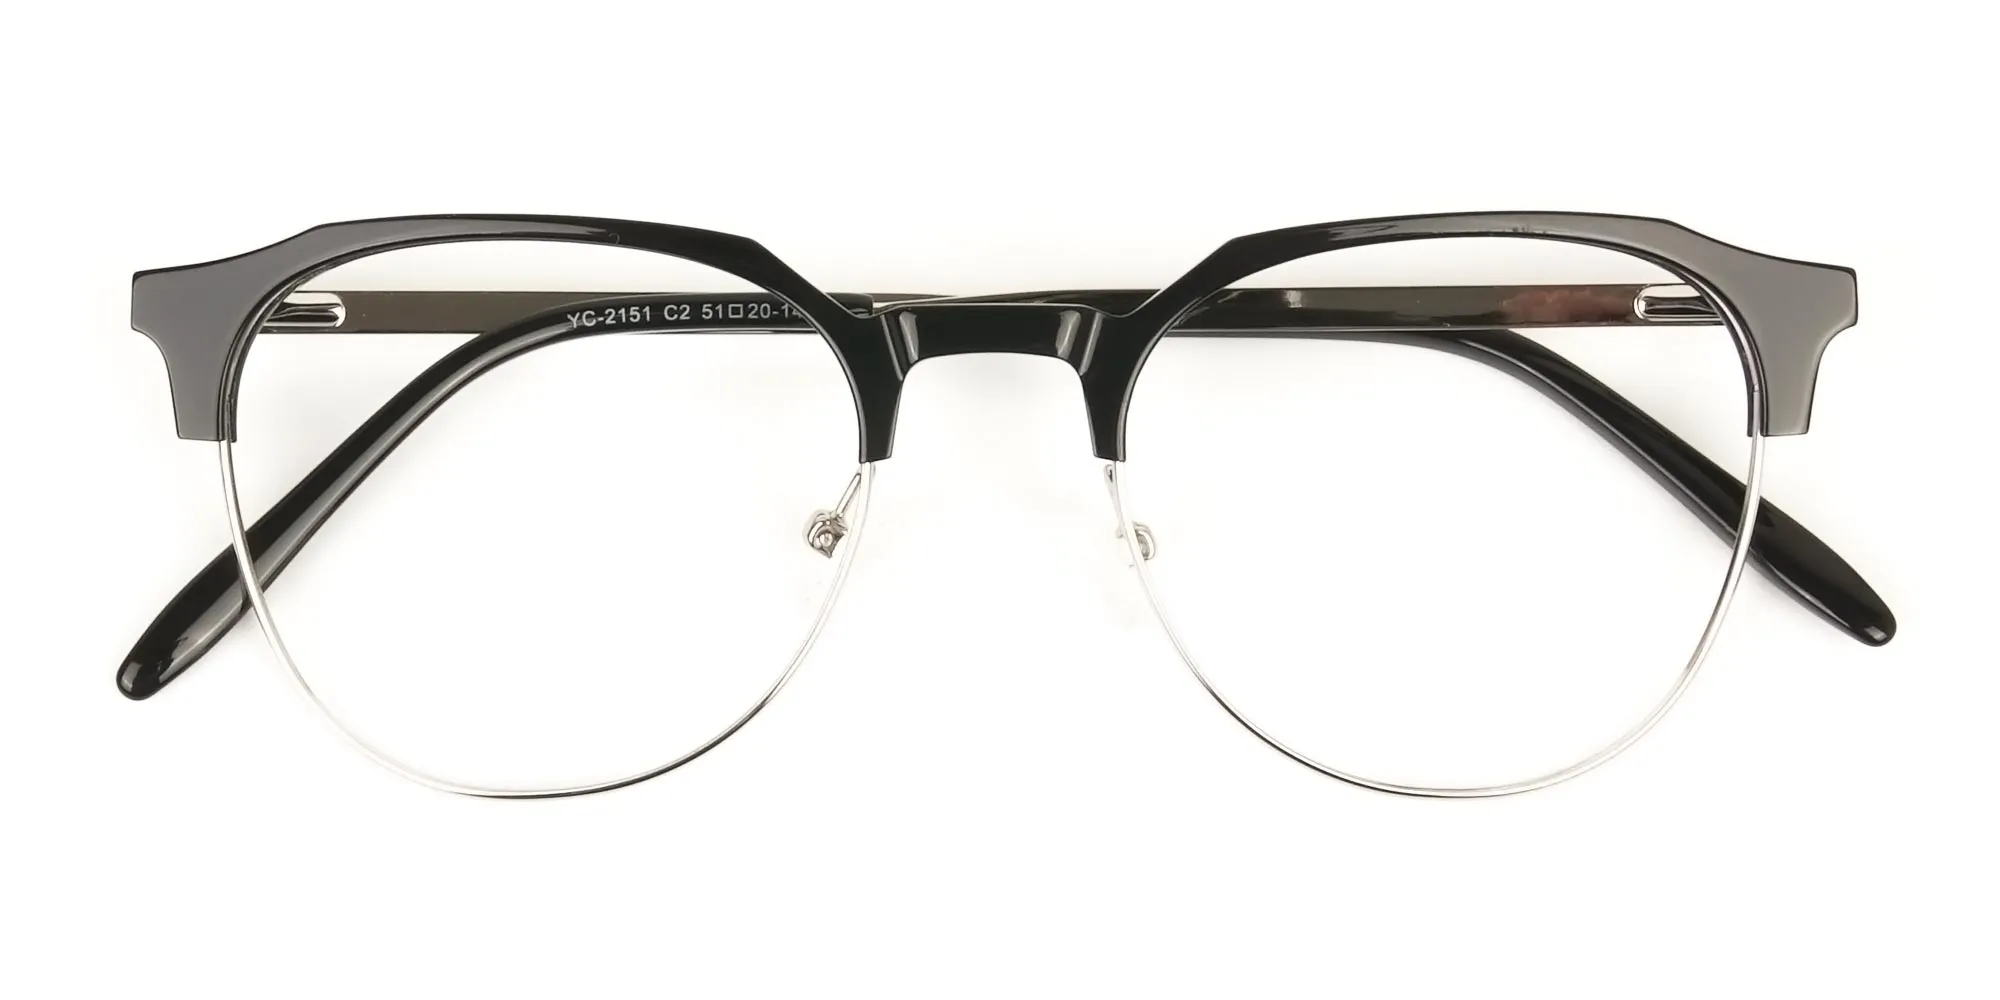 Clubmaster Eyeglasses in Black and Silver Round Frame - 2